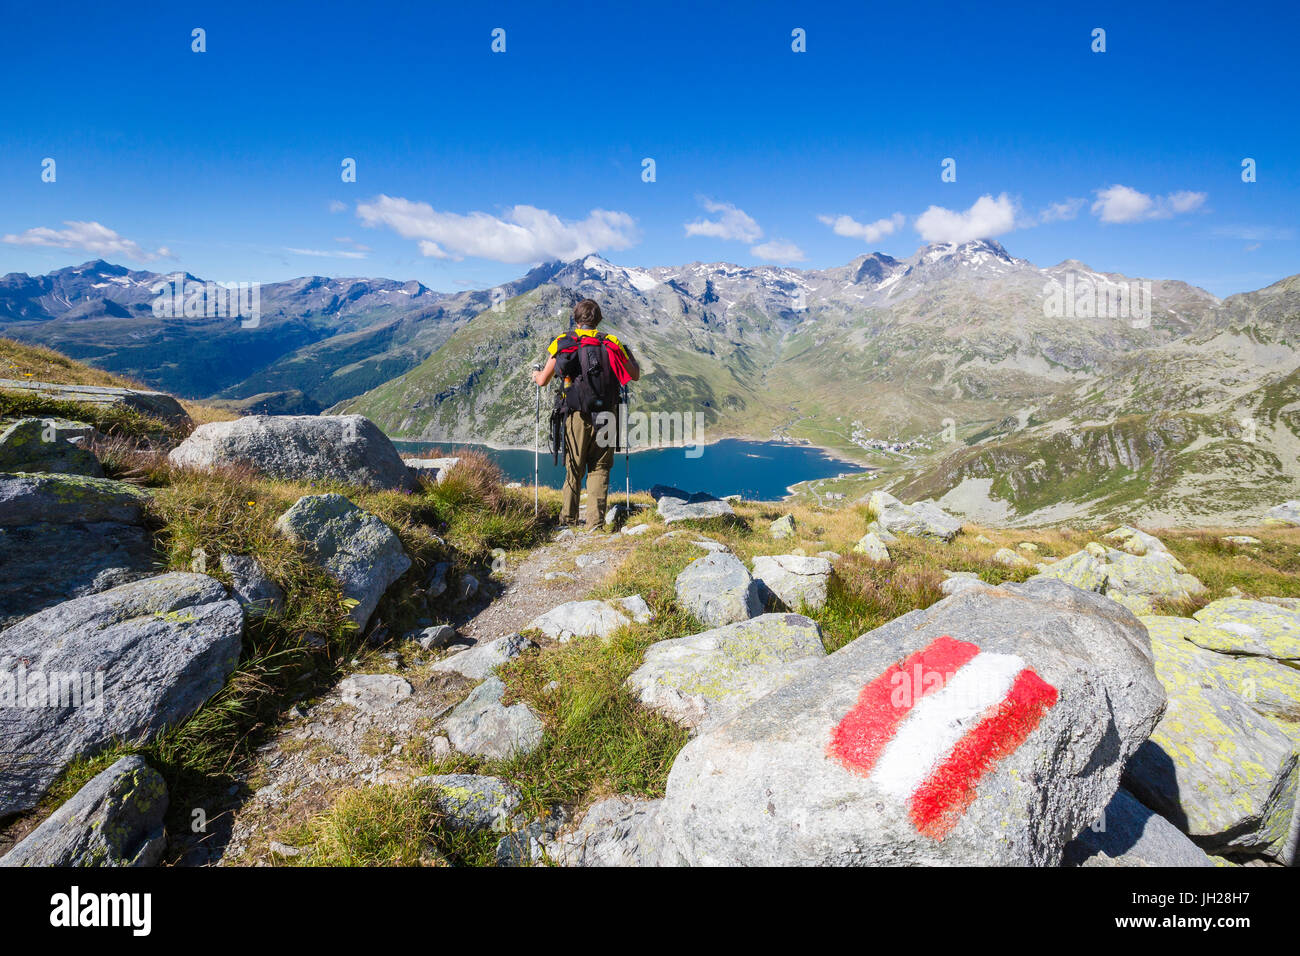 Hiker admires the blue Lake Montespluga and the rocky peaks in summer, Chiavenna Valley, Valtellina, Lombardy, Italy, Europe Stock Photo